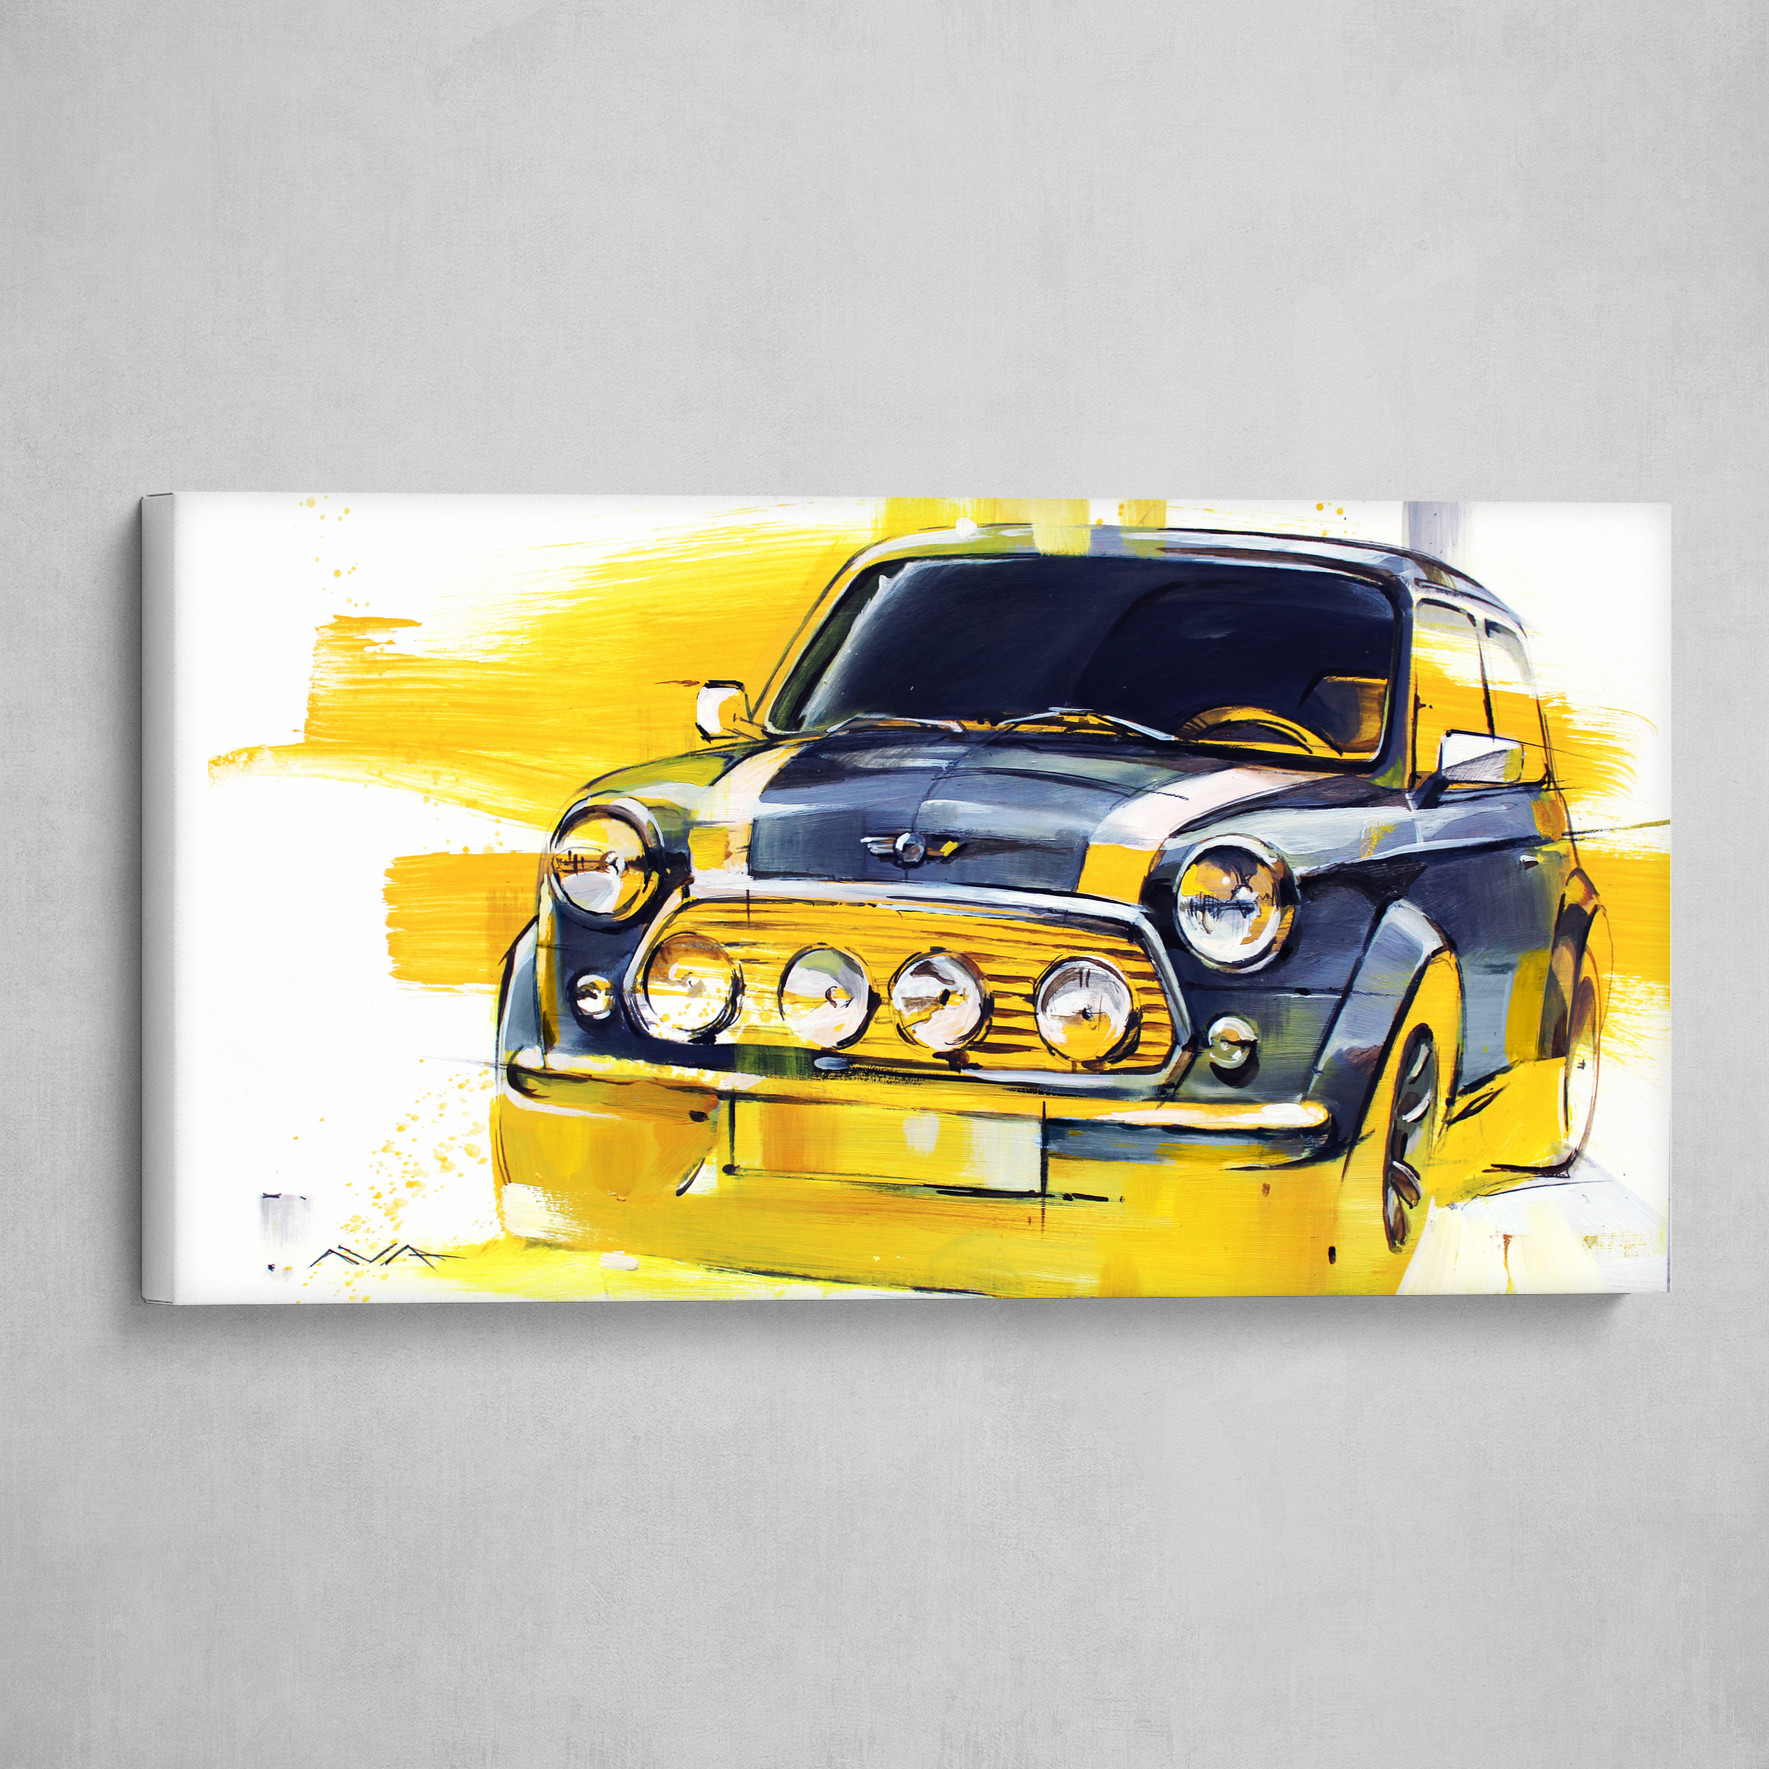 453 Voiture Mini Illustrations - Getty Images